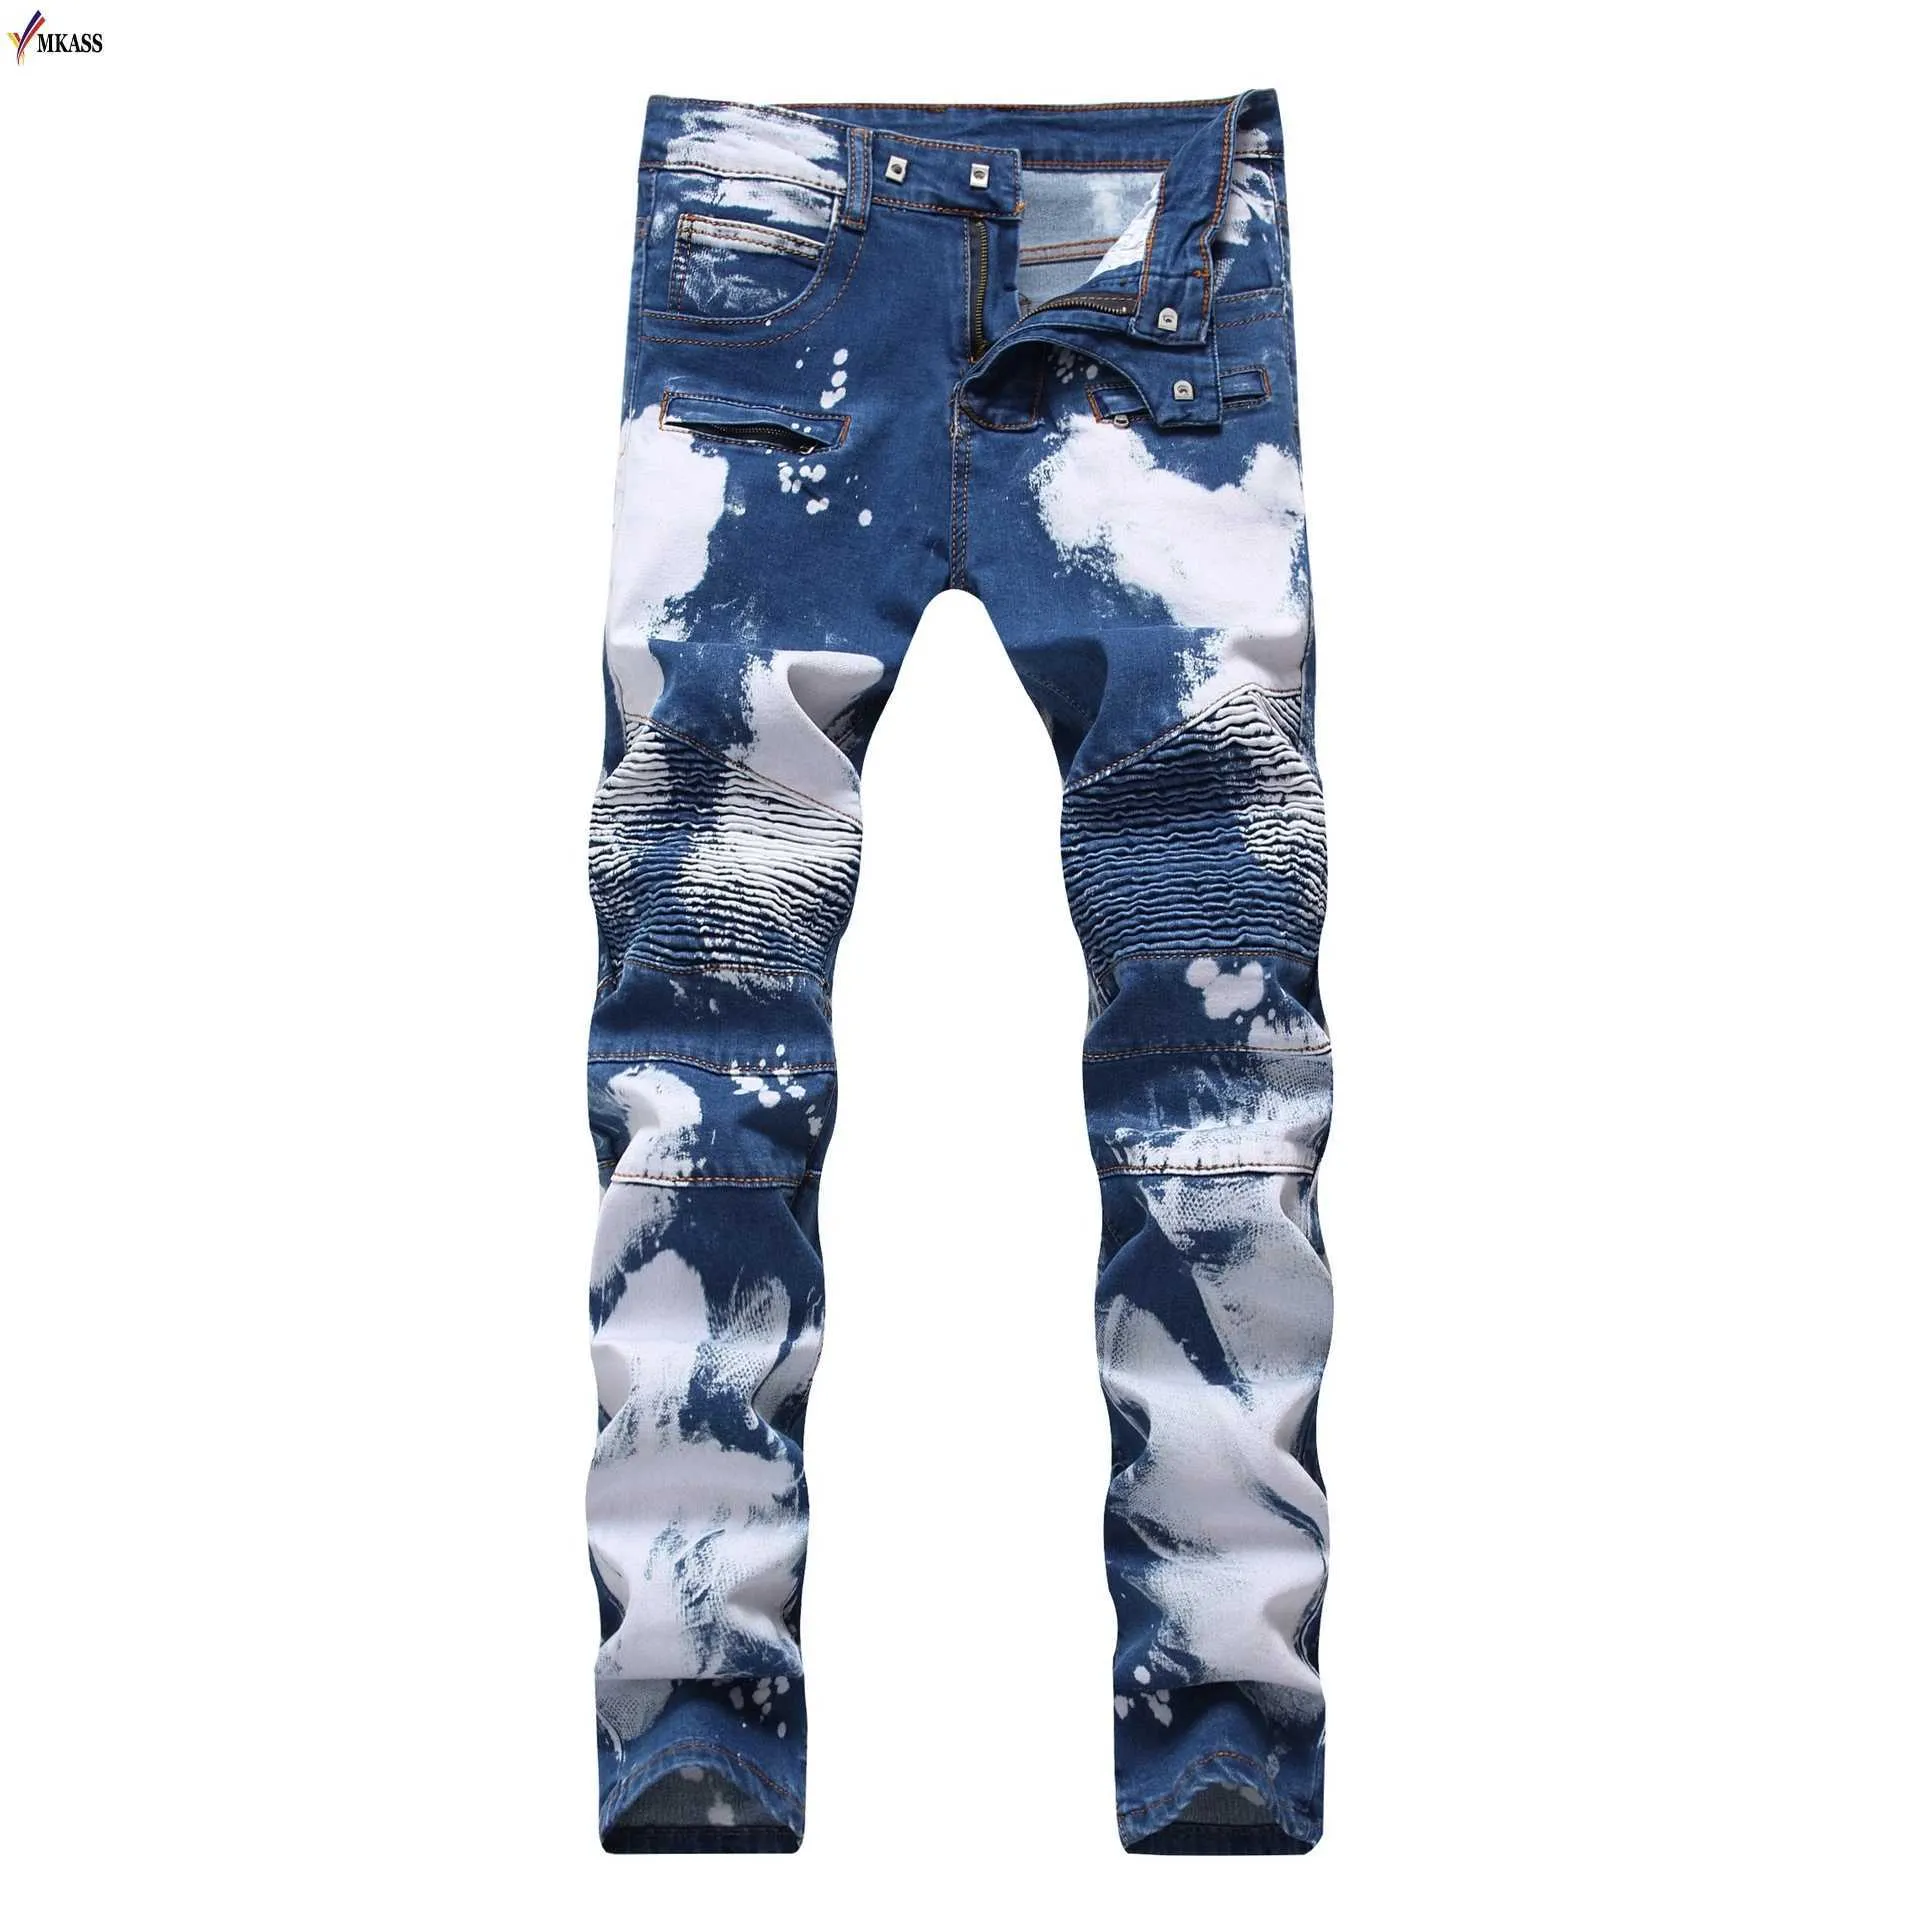 Hot Brand Designer Fashion Jeans Men Straight Blue Color Printed Mens Jeans Motocycle Denim Trousers Ripped Jeans 100% Cotton